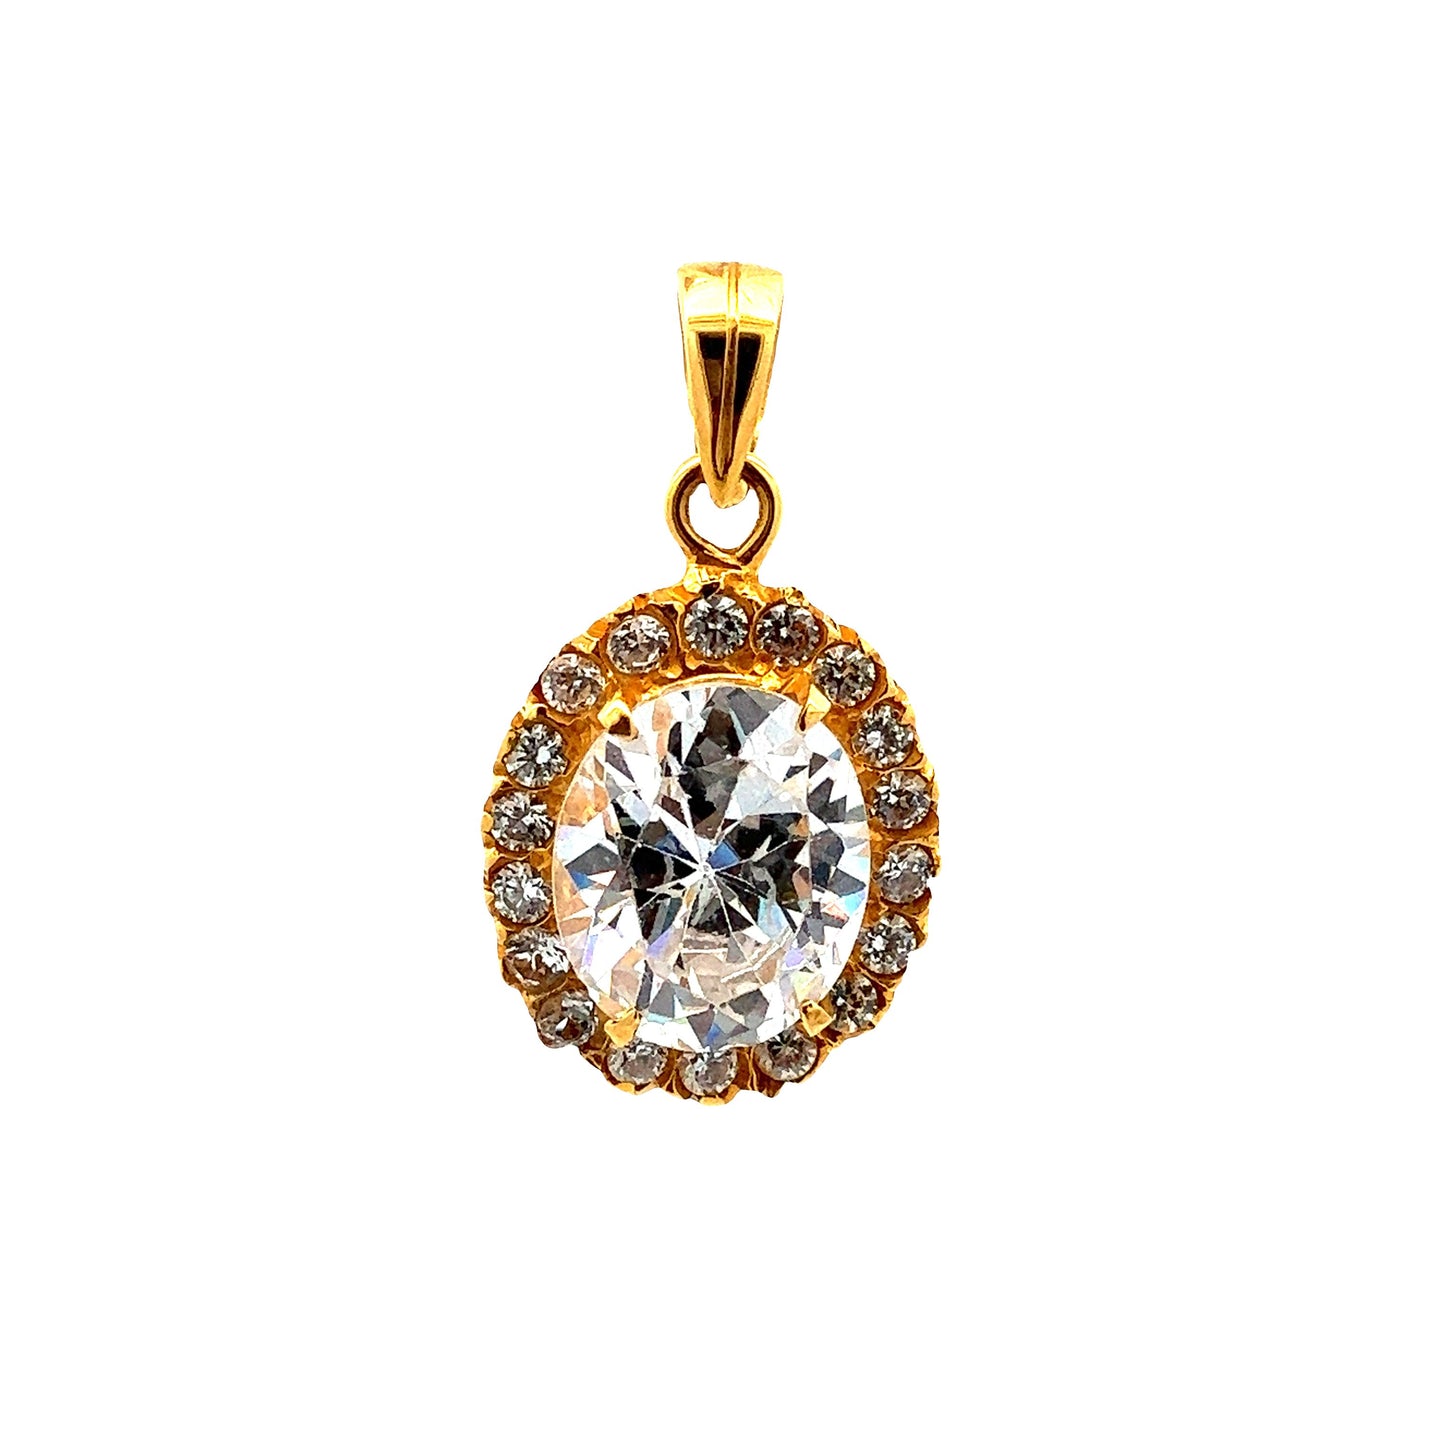 GOLD STONE PENDANT ( 18K ) ( 5.33g ) - P000263 Chain sold separately